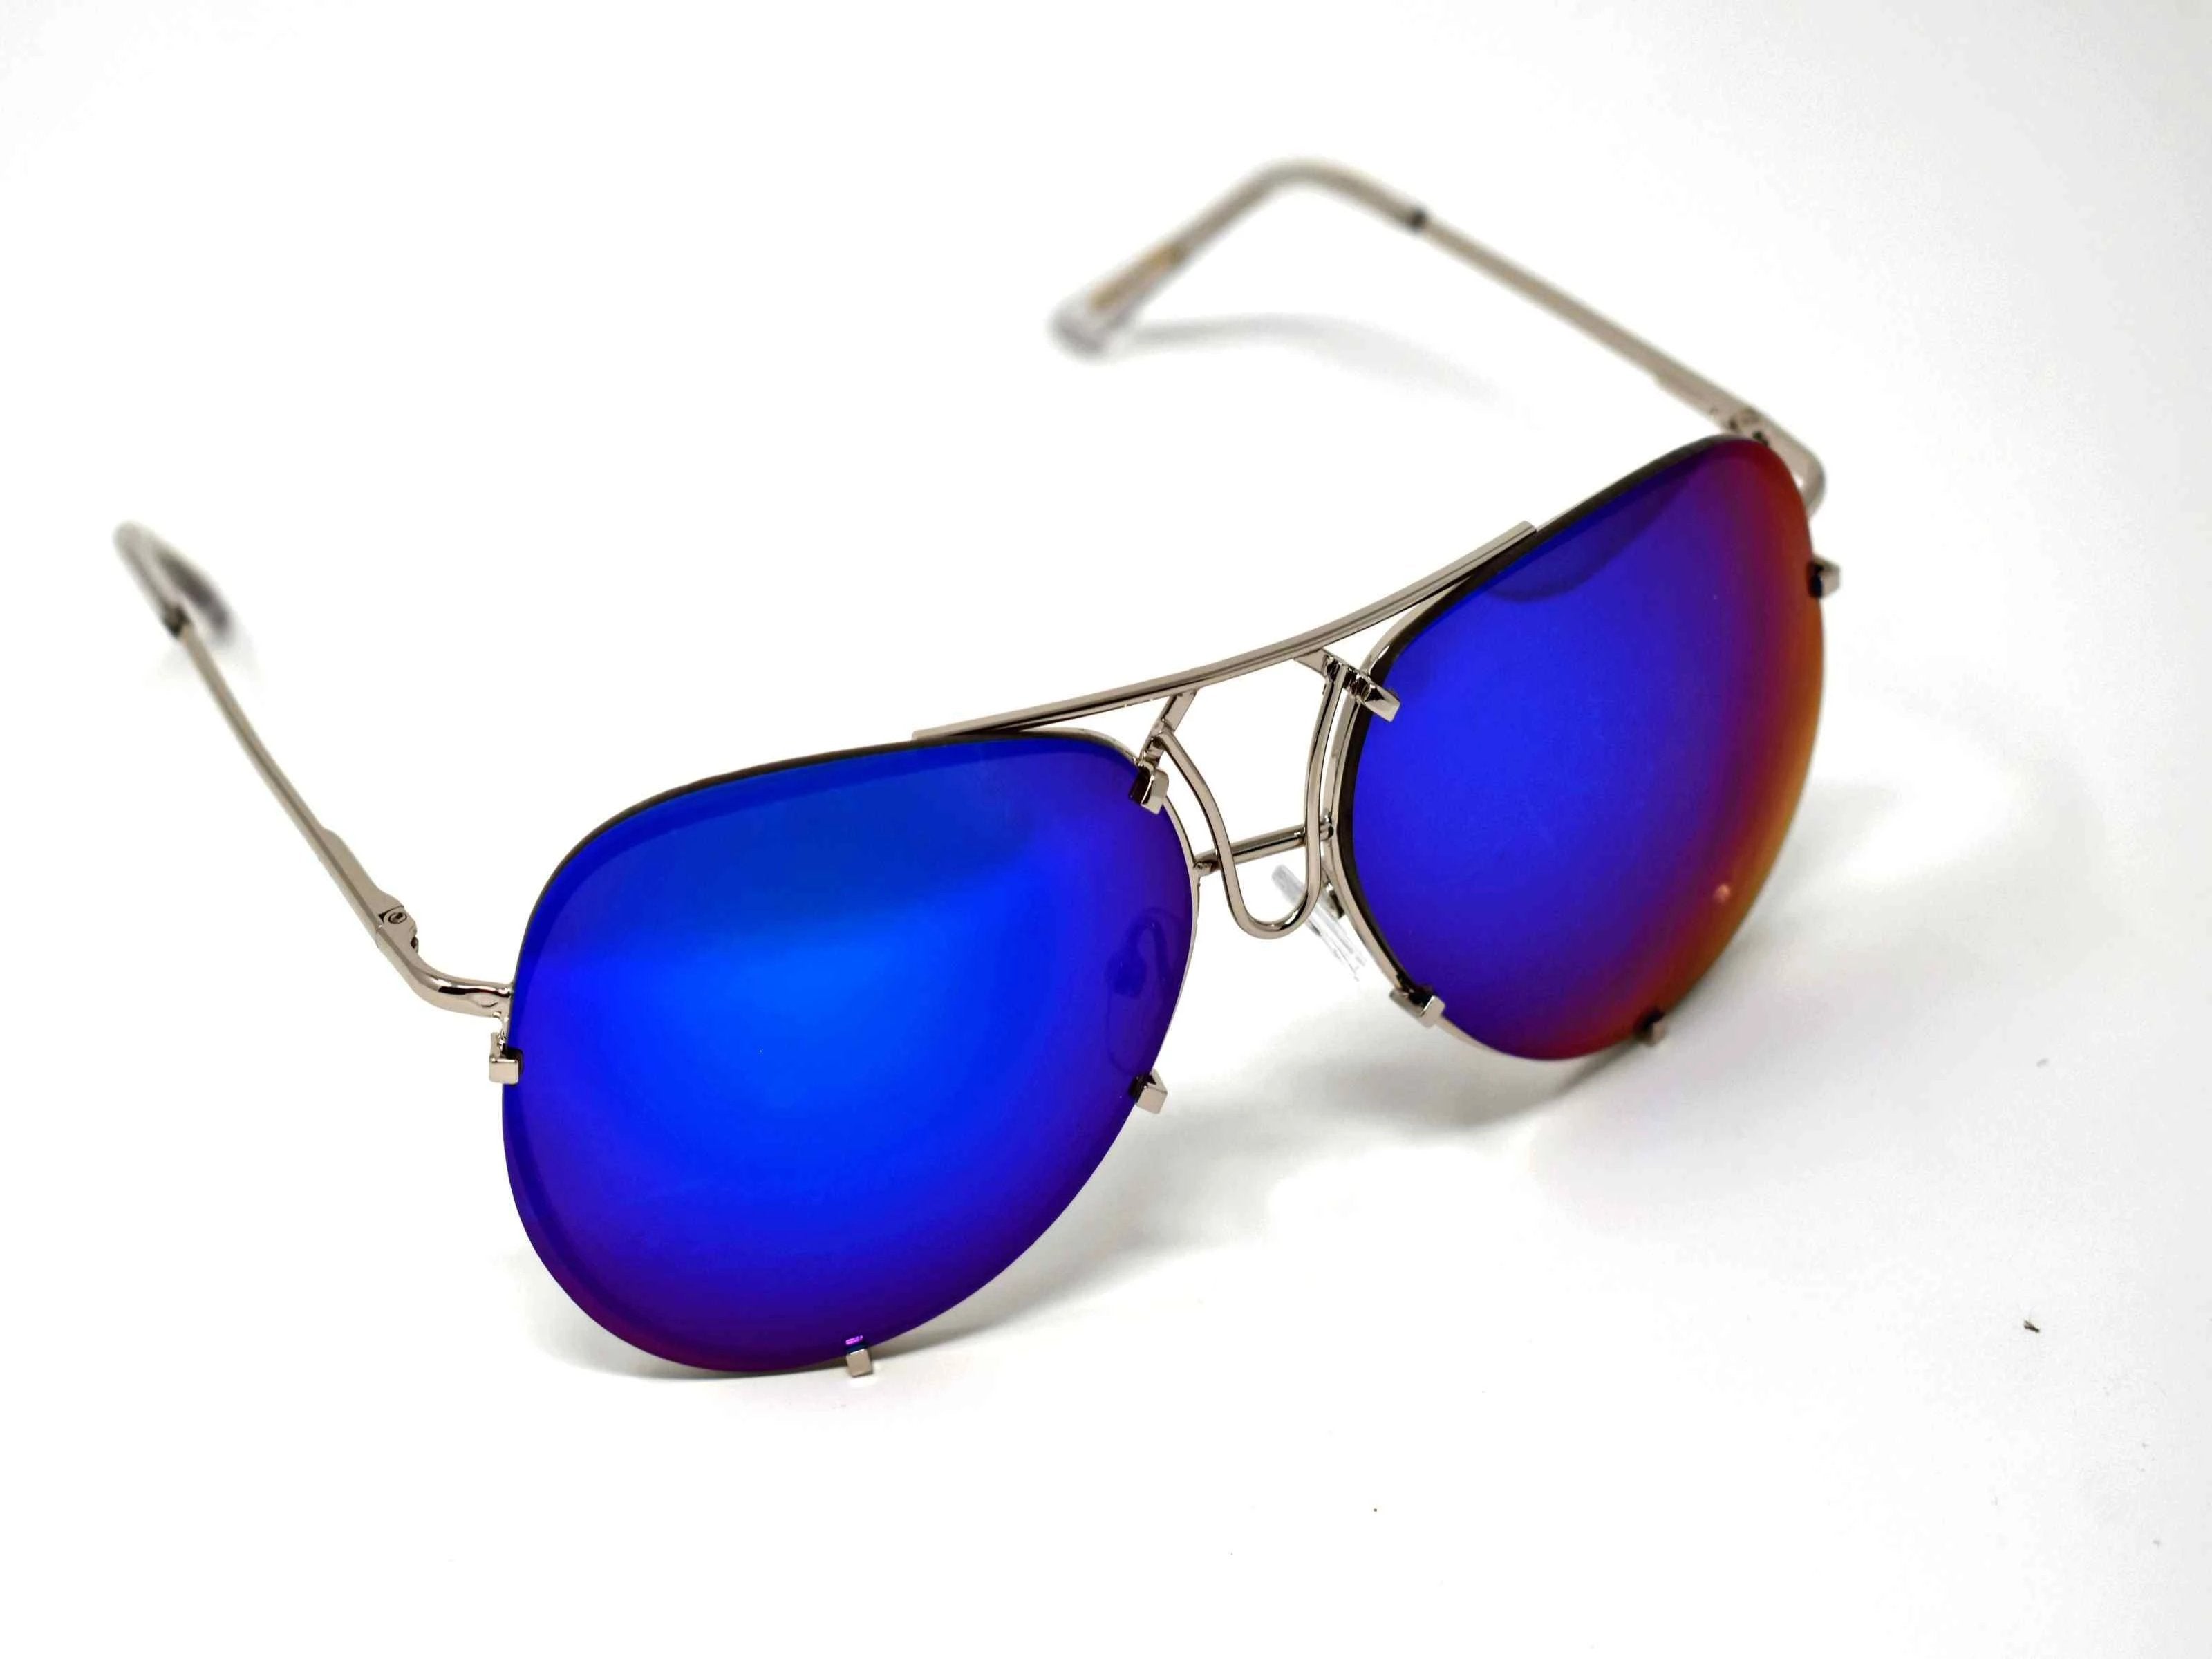 Don't get caught without these yarrow silver frame royal blue mirrored lens aviator sunglasses.